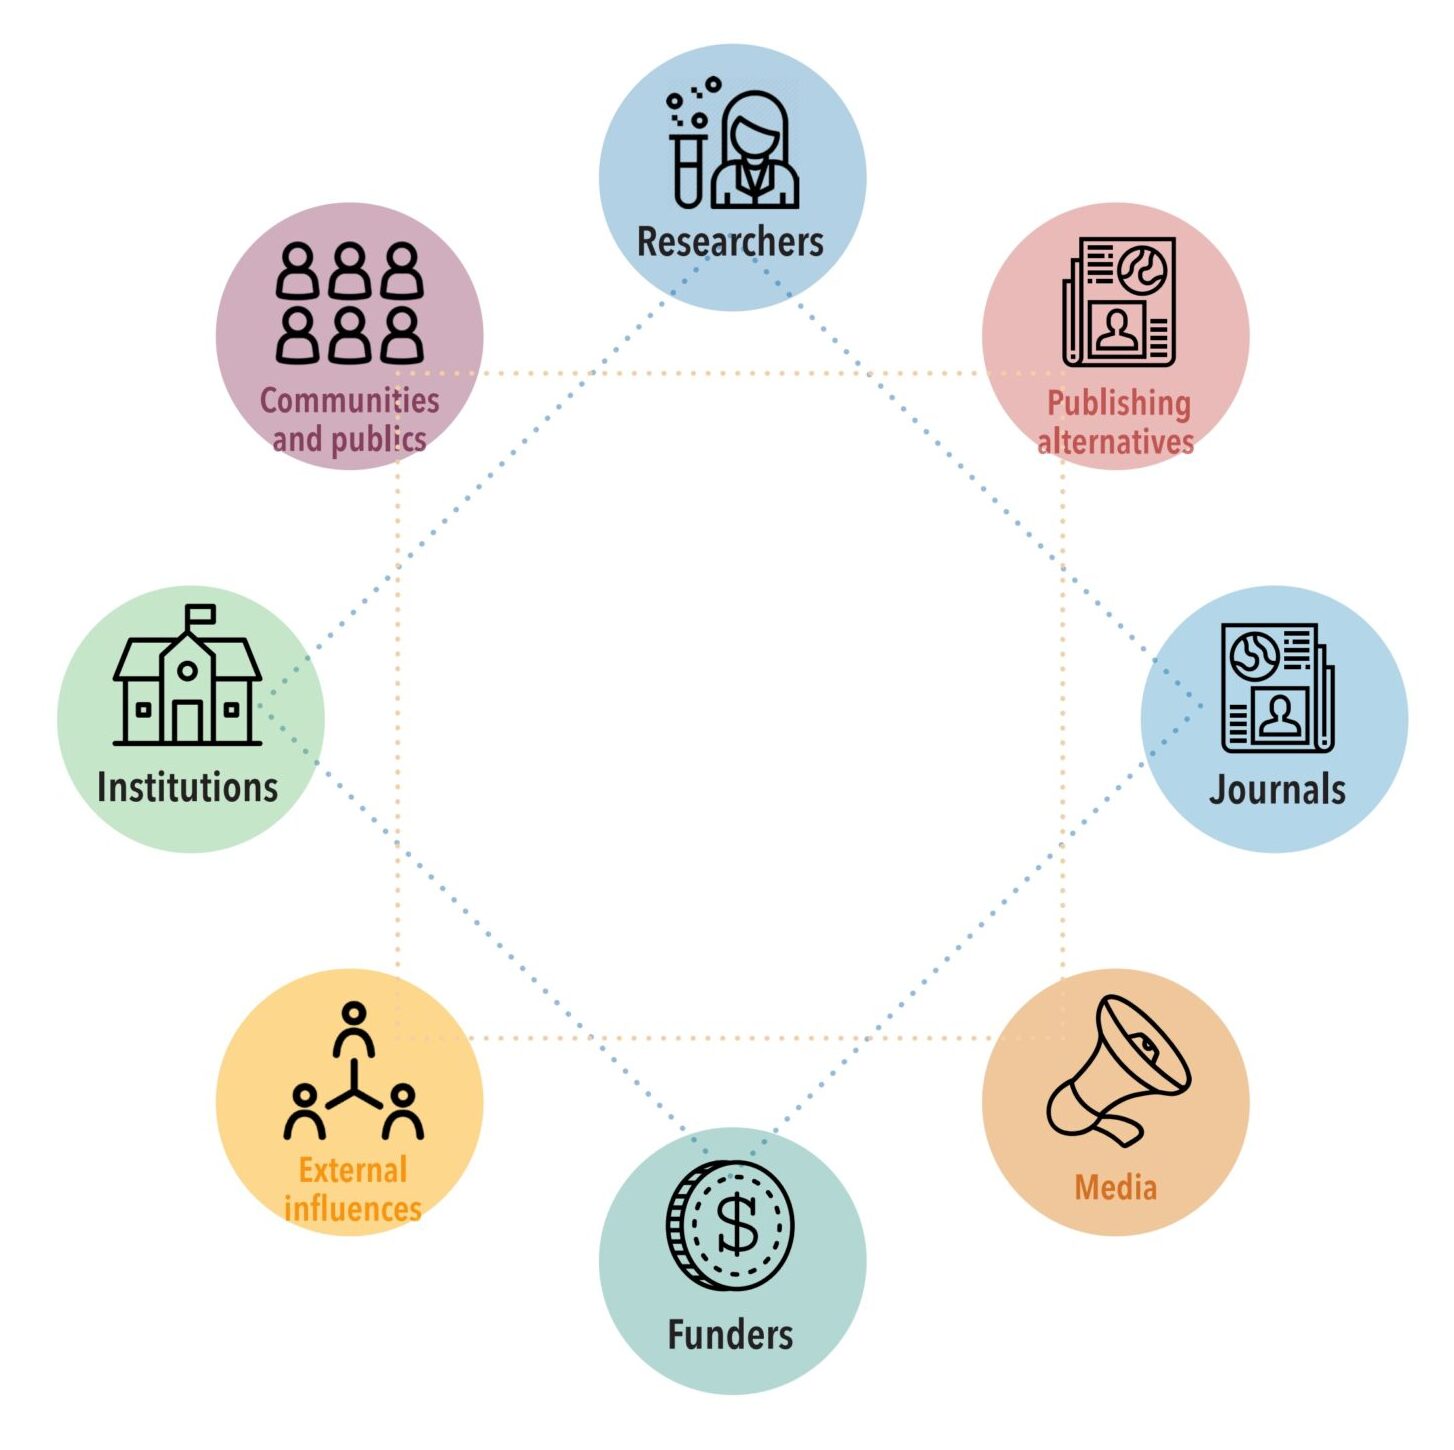 Diagram showing how different actors (researchers, publishers, funders, research institutes, etc) in the scholarly ecosystem are connected with each other.